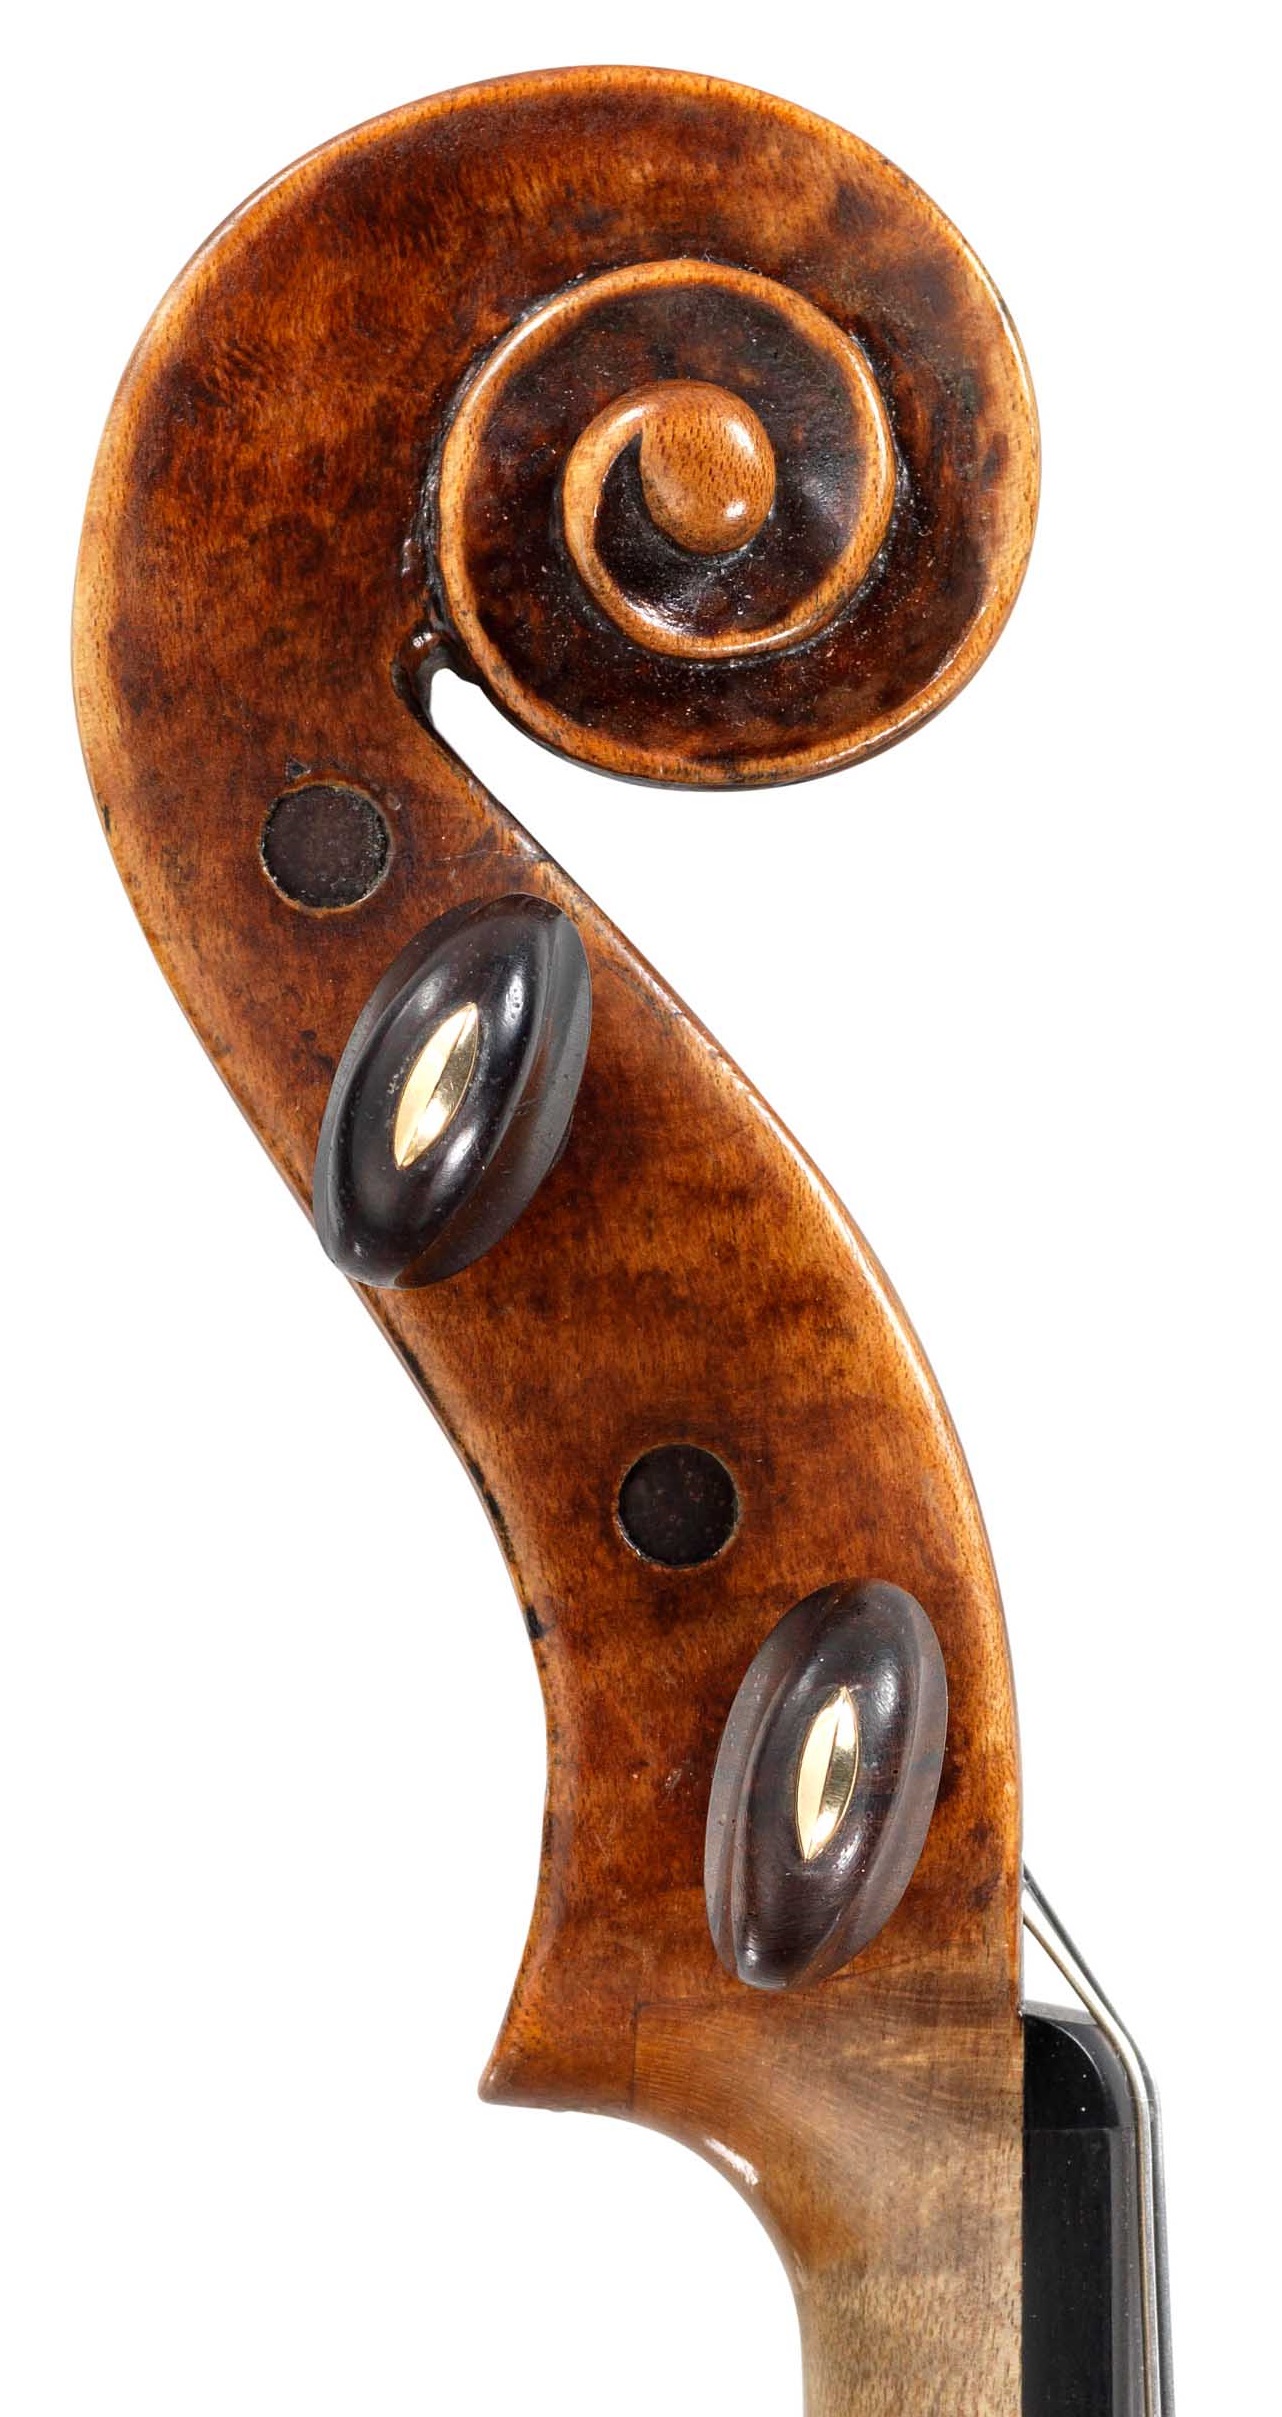 Scroll of violin by JB Vuillaume, dated 1854, exhibited by Ingles & Hayday at Sotheby's in 2012